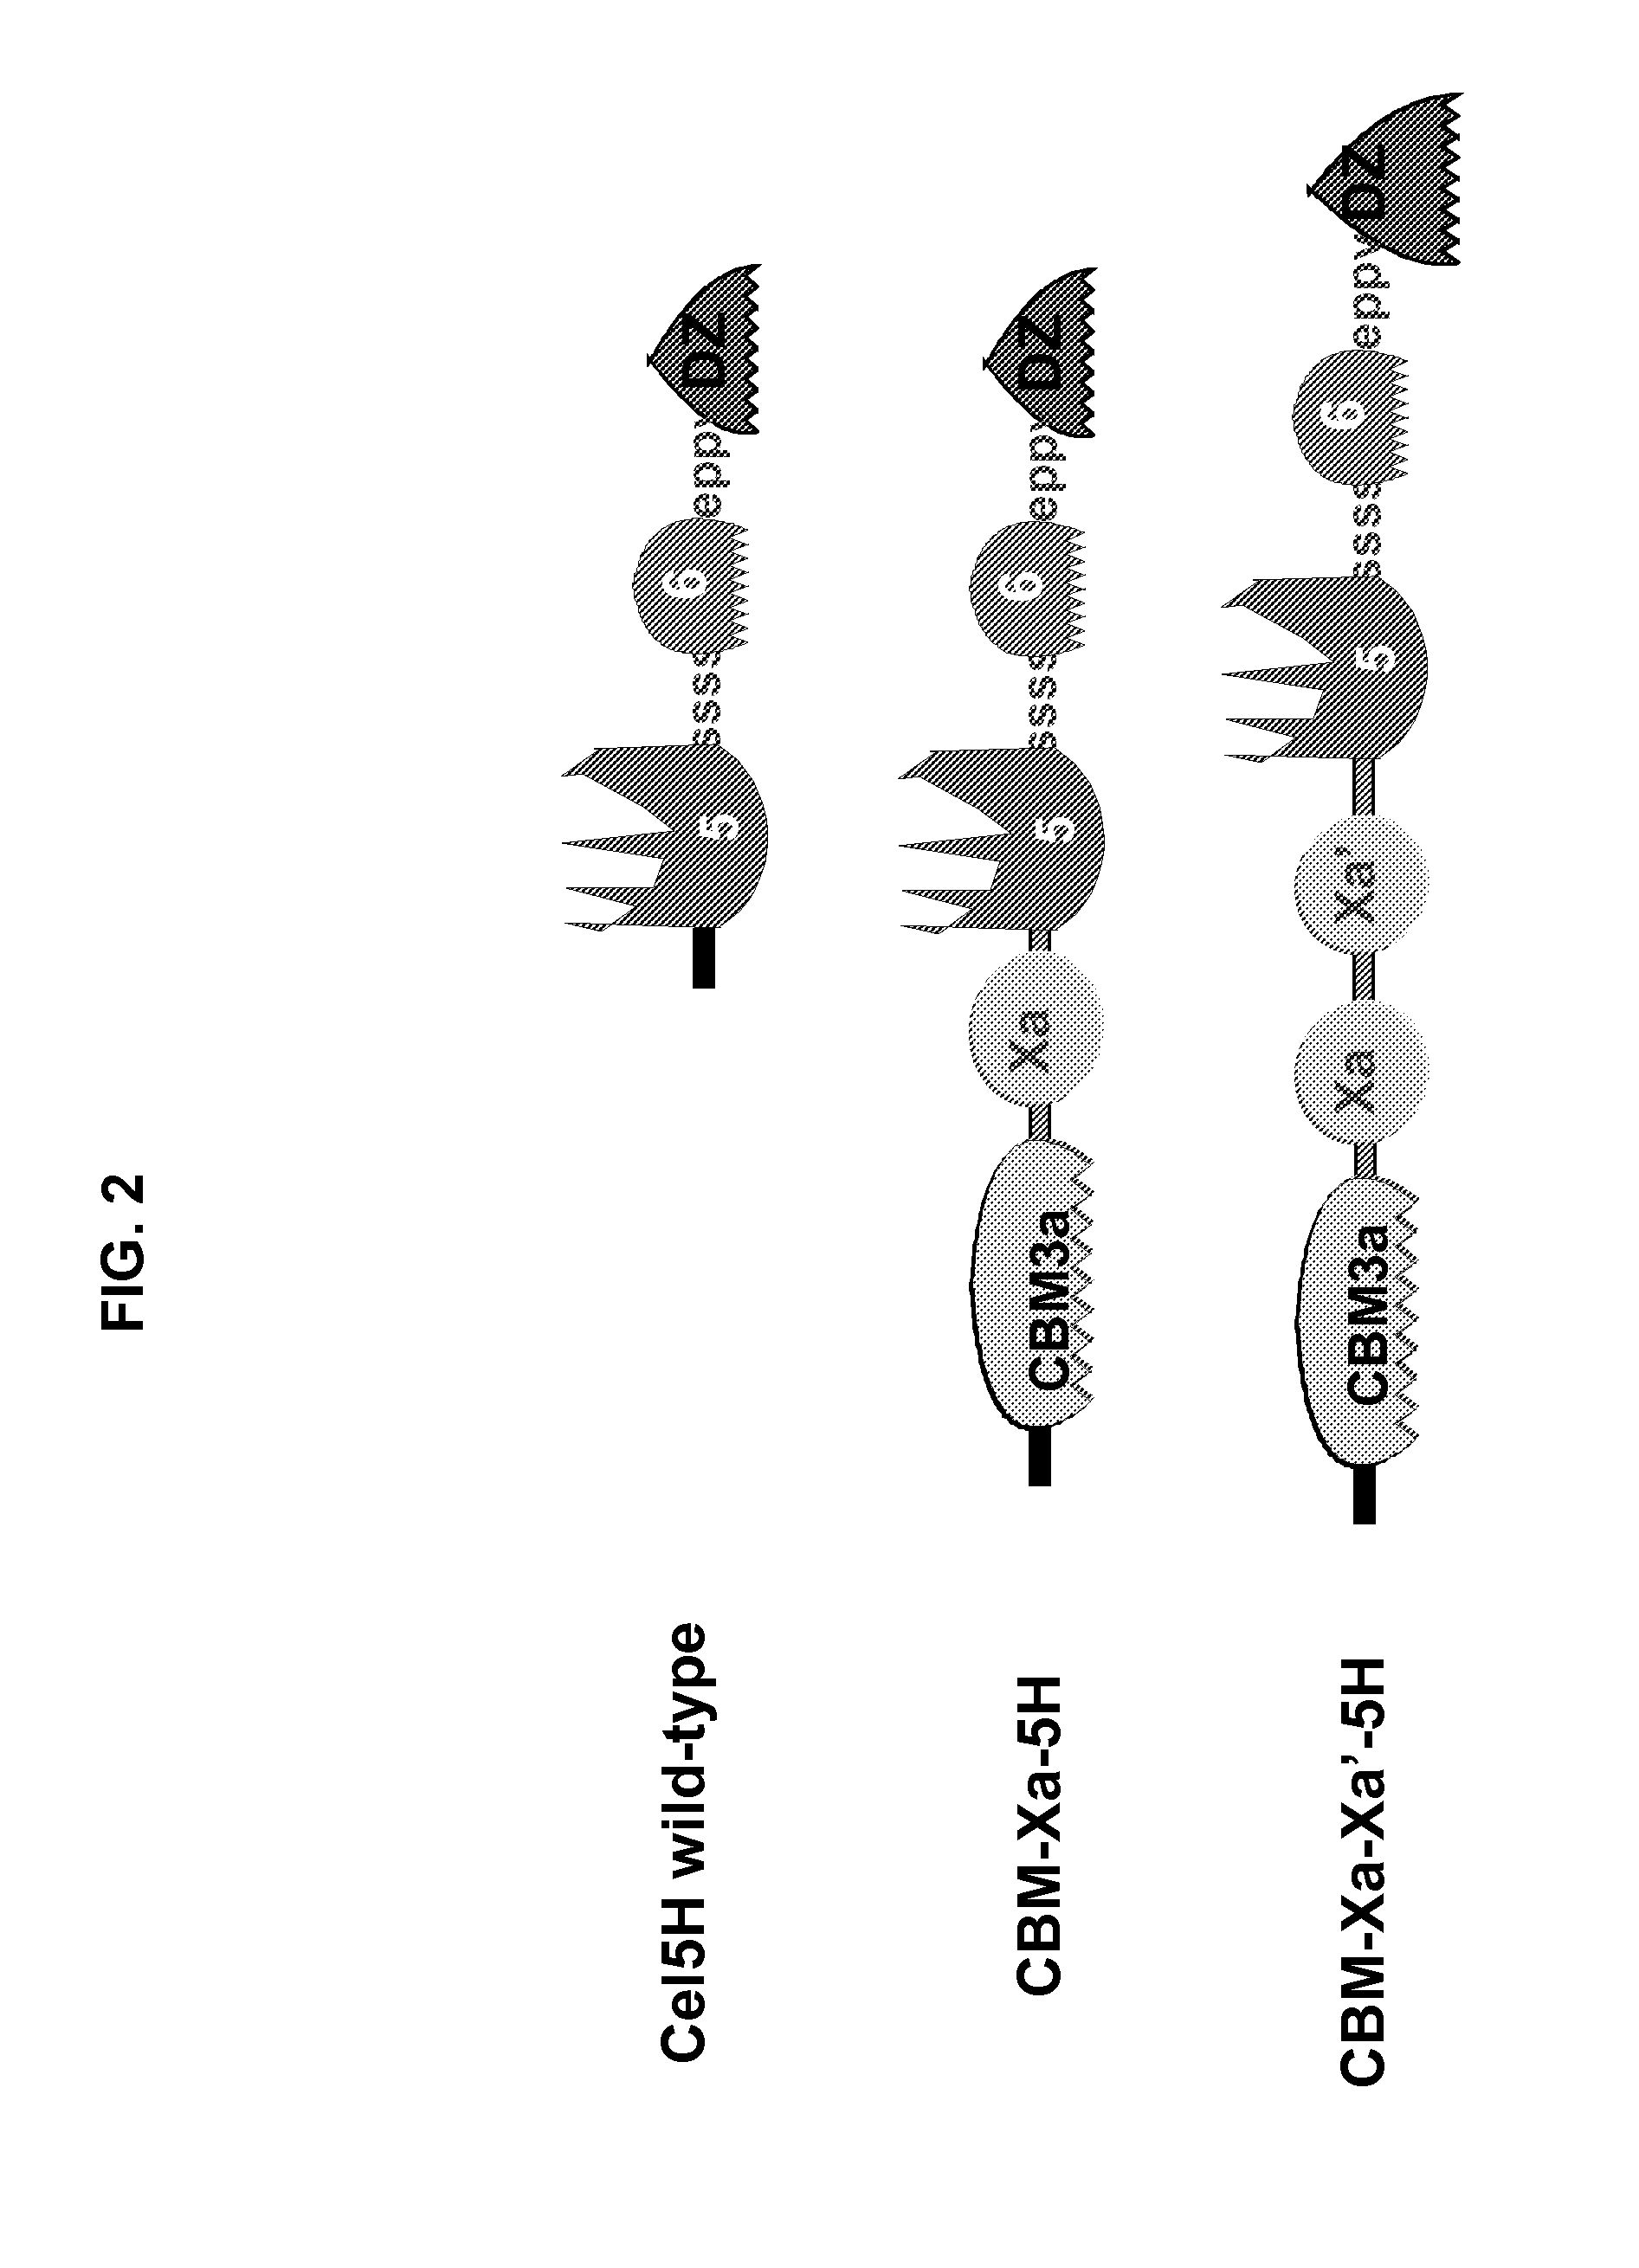 Constructs and Methods for the Production and Secretion of Polypeptides